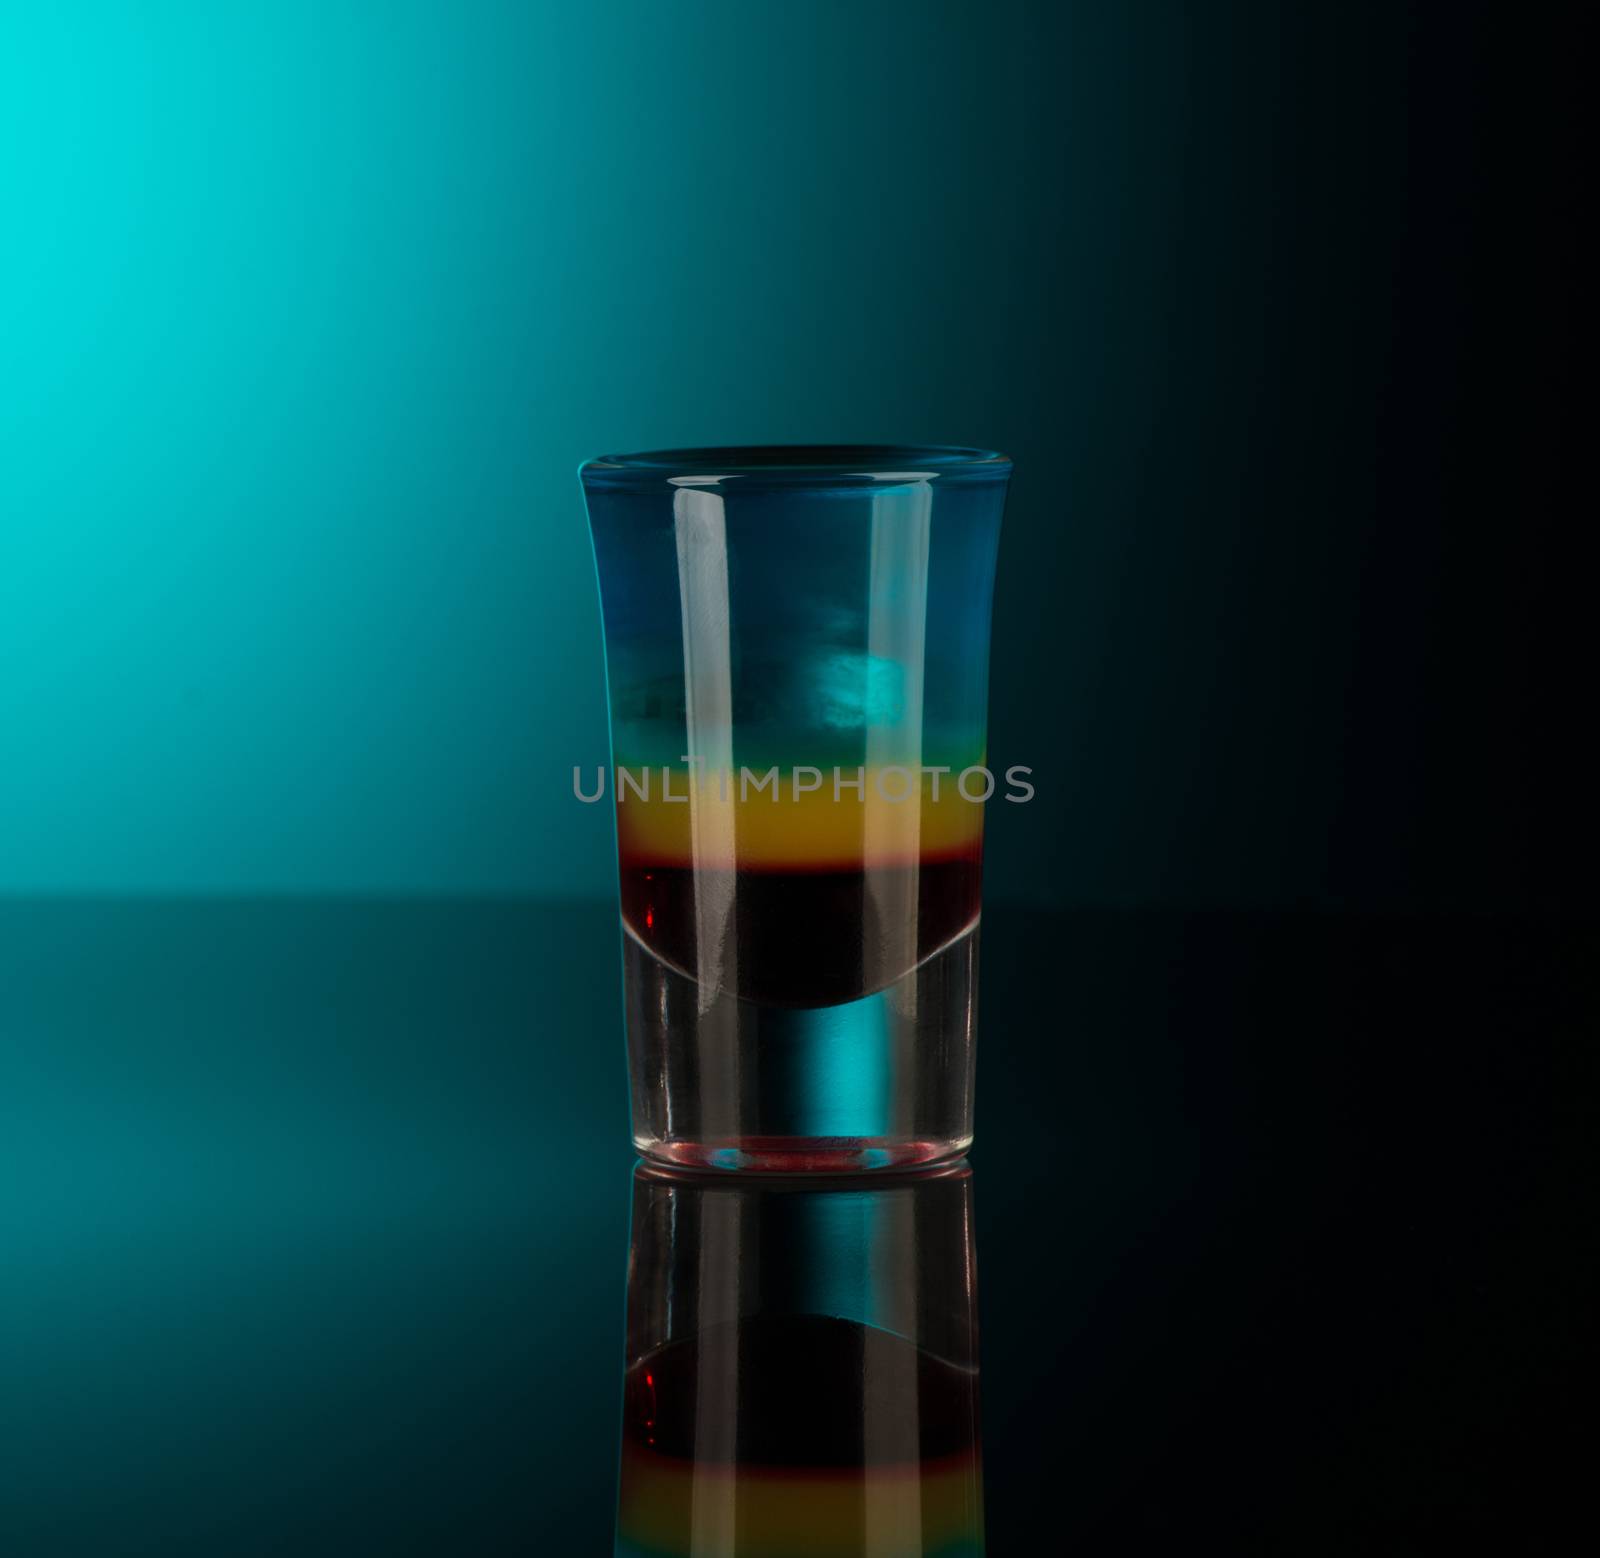 mixed alcoholic liquor in a shot glass isolated on a dark background with backlighting